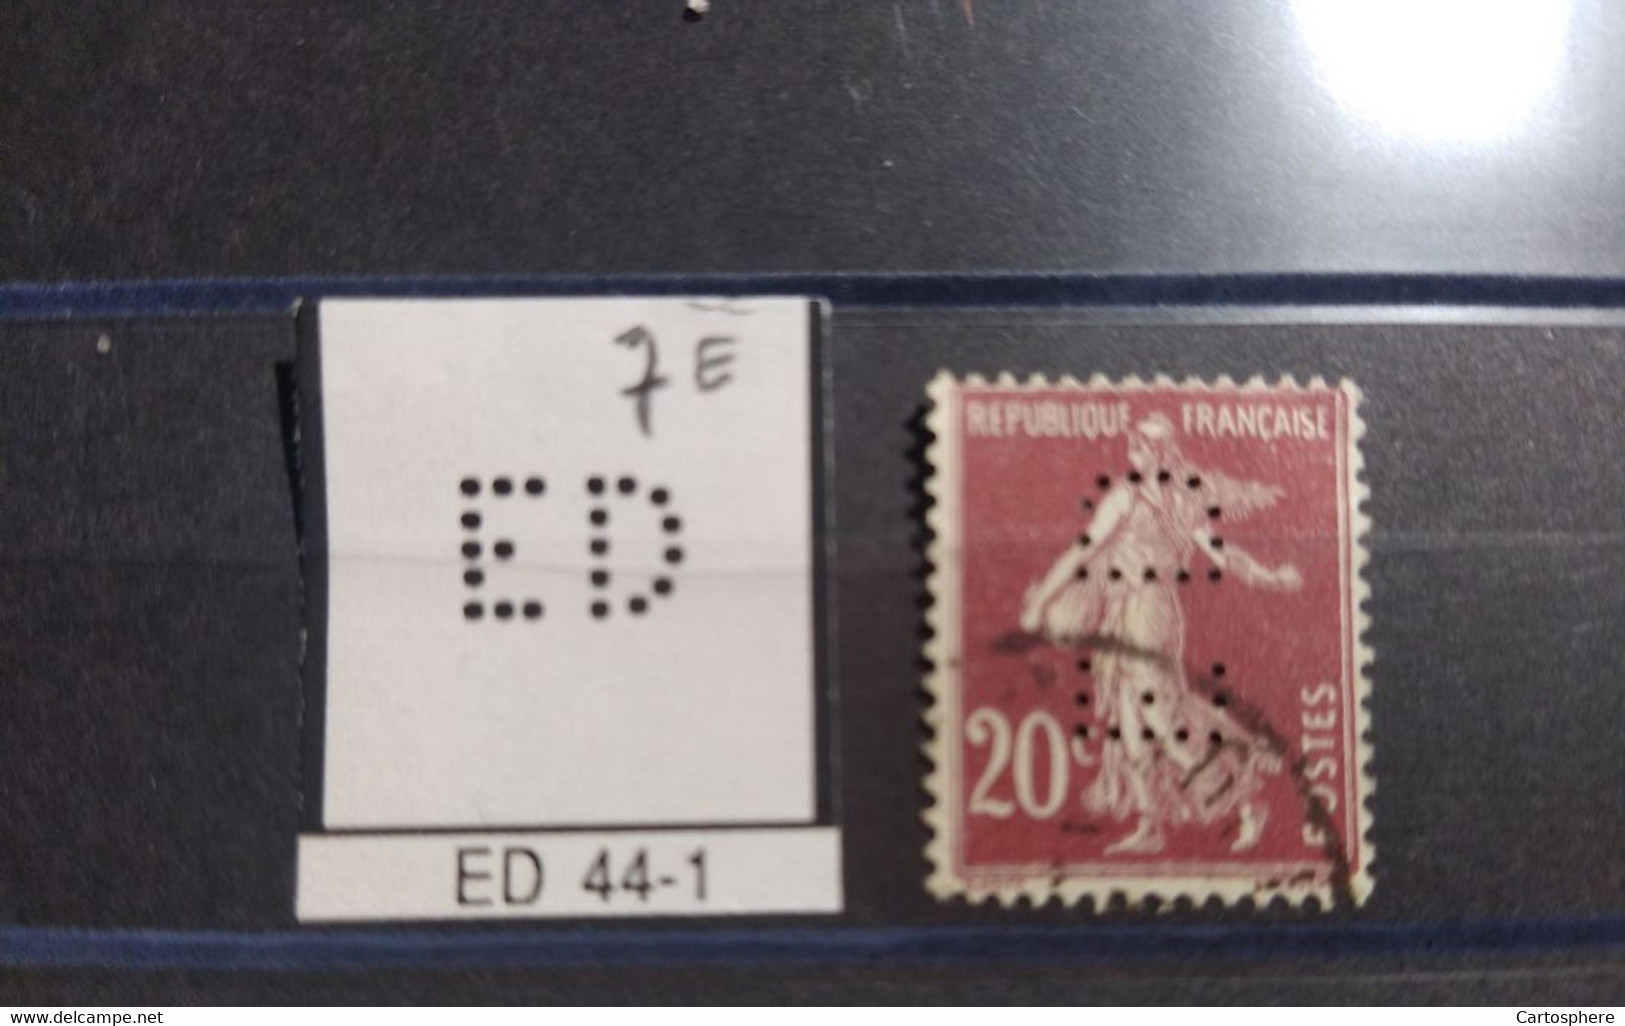 FRANCE ED 44-1 TIMBRE EC32 INDICE 6 SUR SEMEUSE PERFORE PERFORES PERFIN PERFINS PERFO PERFORATION PERFORIERT - Used Stamps